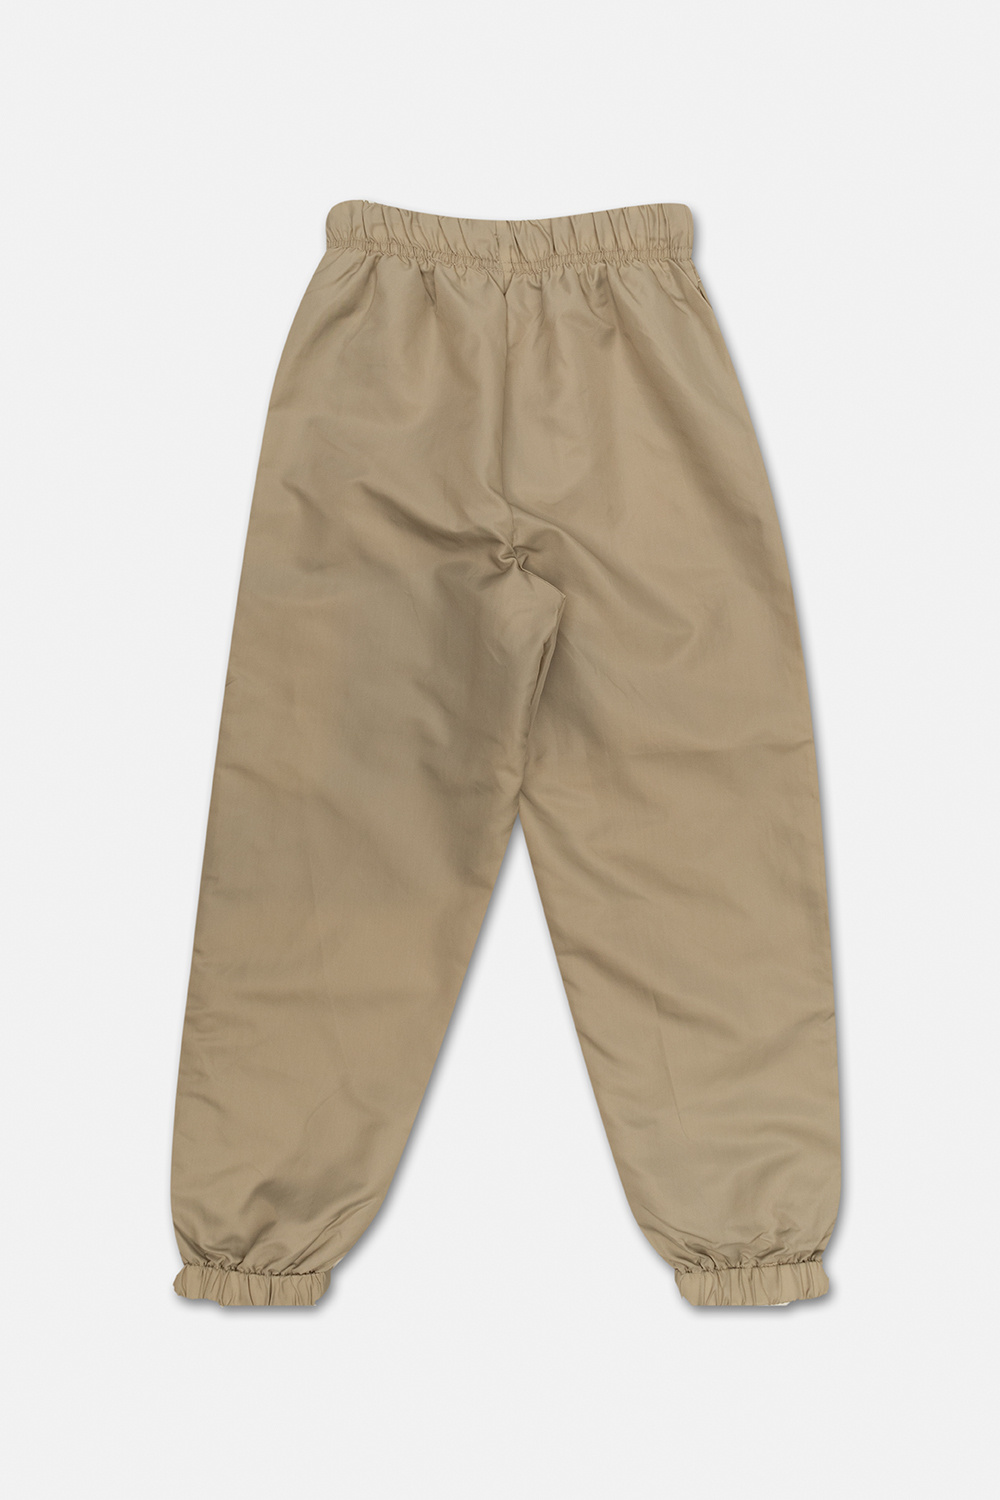 Fear Of God Essentials Kids Trousers with logo